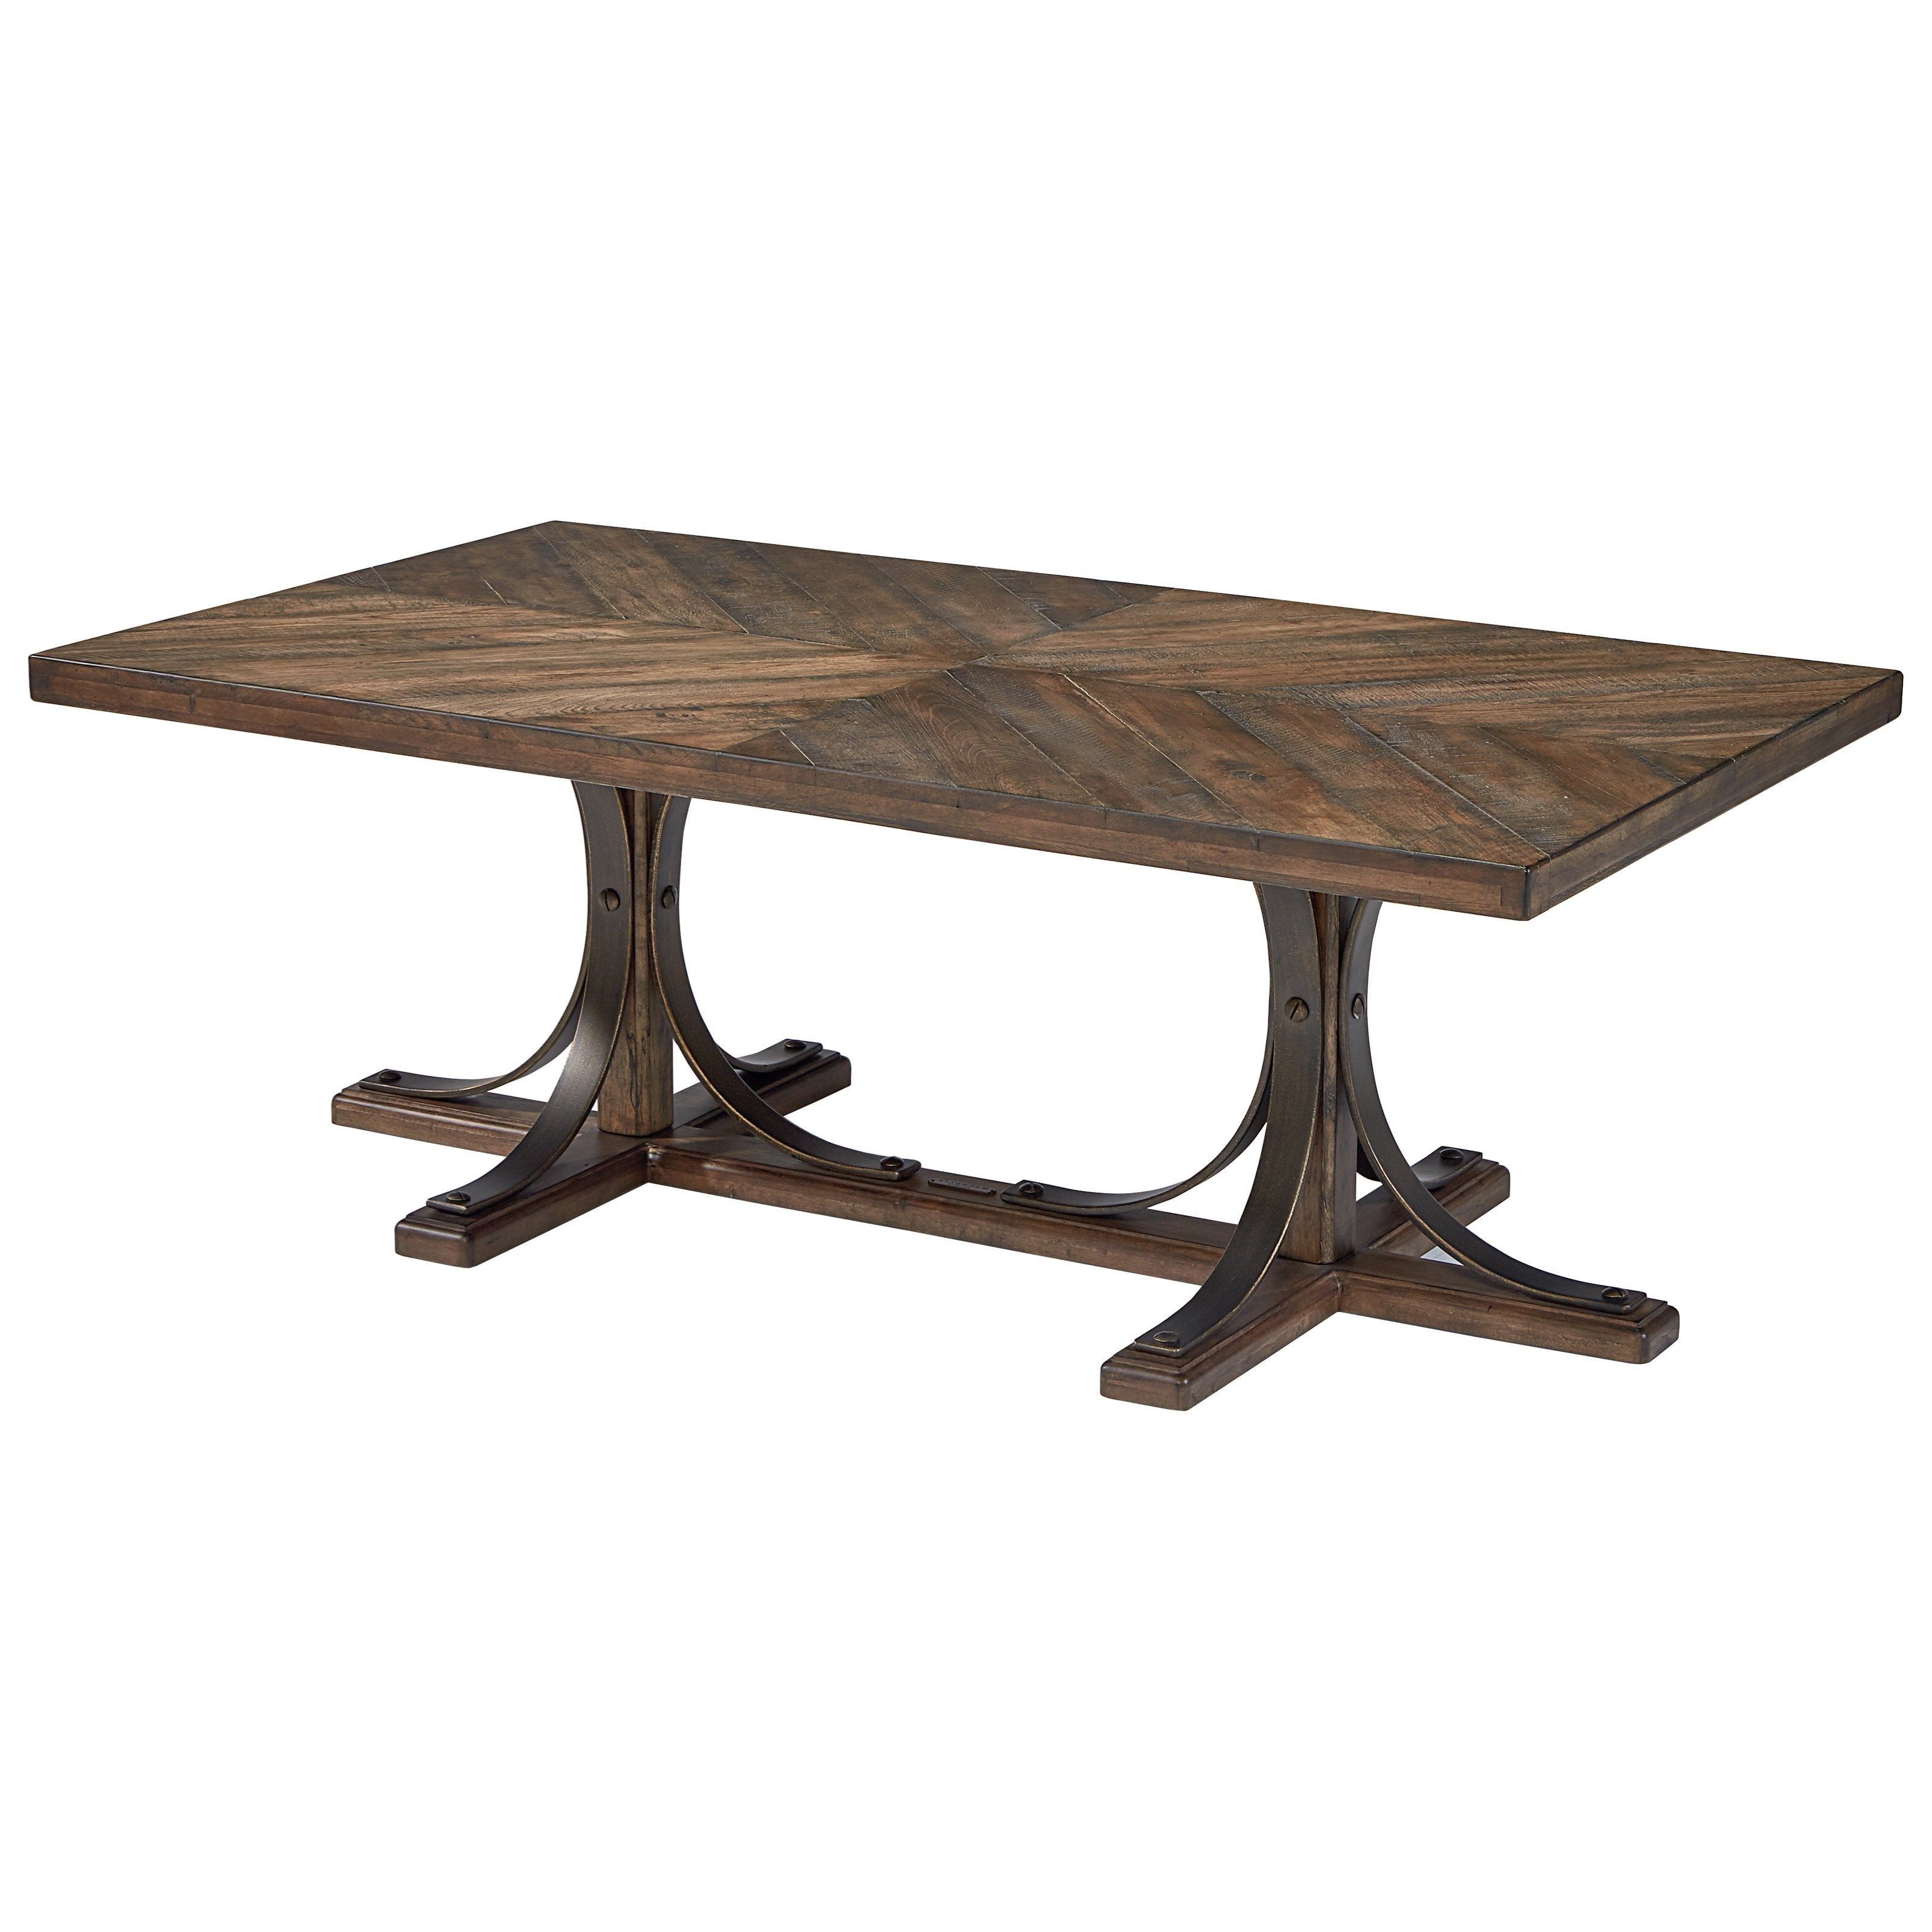 Traditional Wood Top Cocktail Table With Metal Basemagnolia Home With Regard To Recent Magnolia Home Ellipse Cocktail Tables By Joanna Gaines (Gallery 8 of 20)